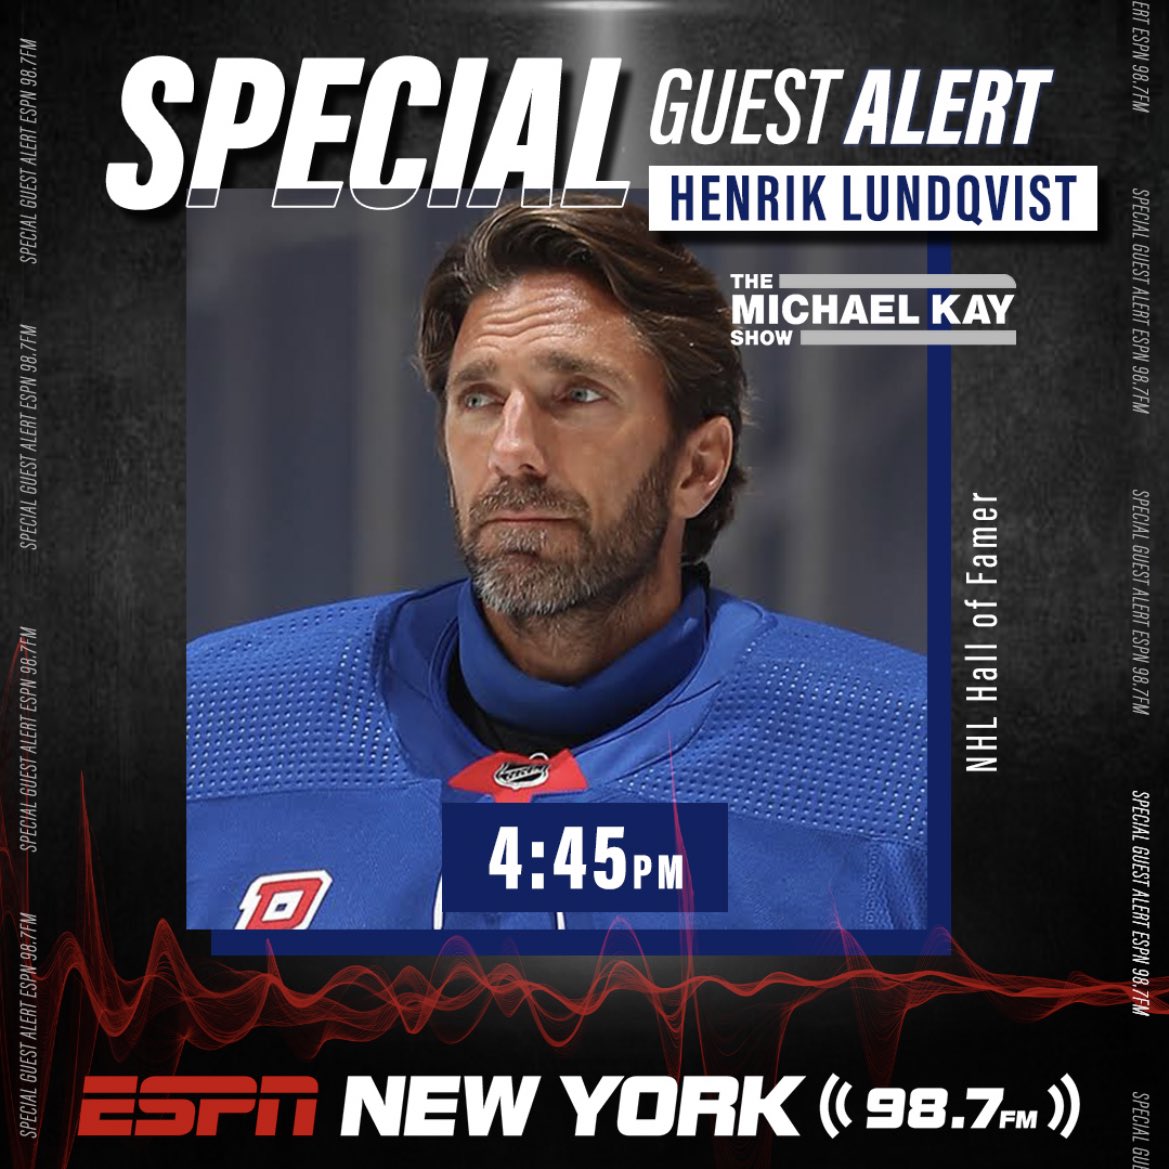 SPECIAL GUEST ALERT! TODAY at 4:45PM on @TMKSESPN: @HLundqvist joins the program to discuss everything New York Rangers! LISTEN HERE: bit.ly/ListenESPNNY, on 98.7FM or on the ESPN NY App! DOWNLOAD THE APP HERE: goodkarma.qrd.by/espnny-app